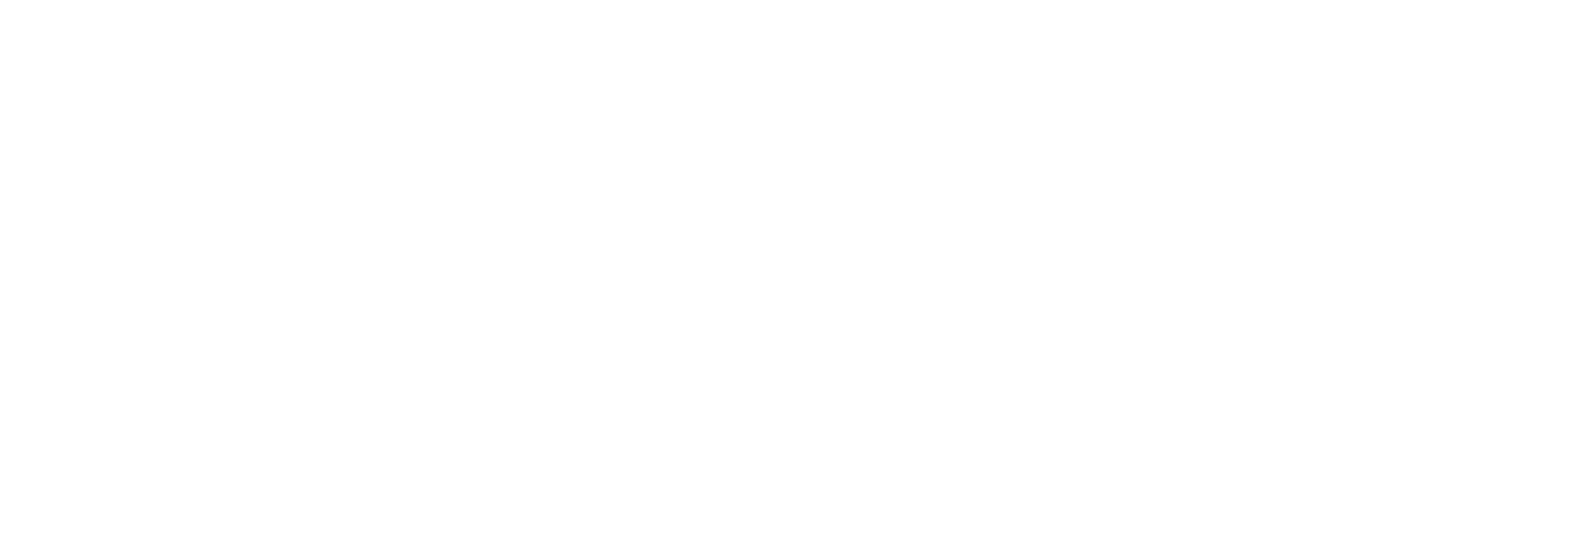 The Children's Place logo in transparent PNG and vectorized SVG formats